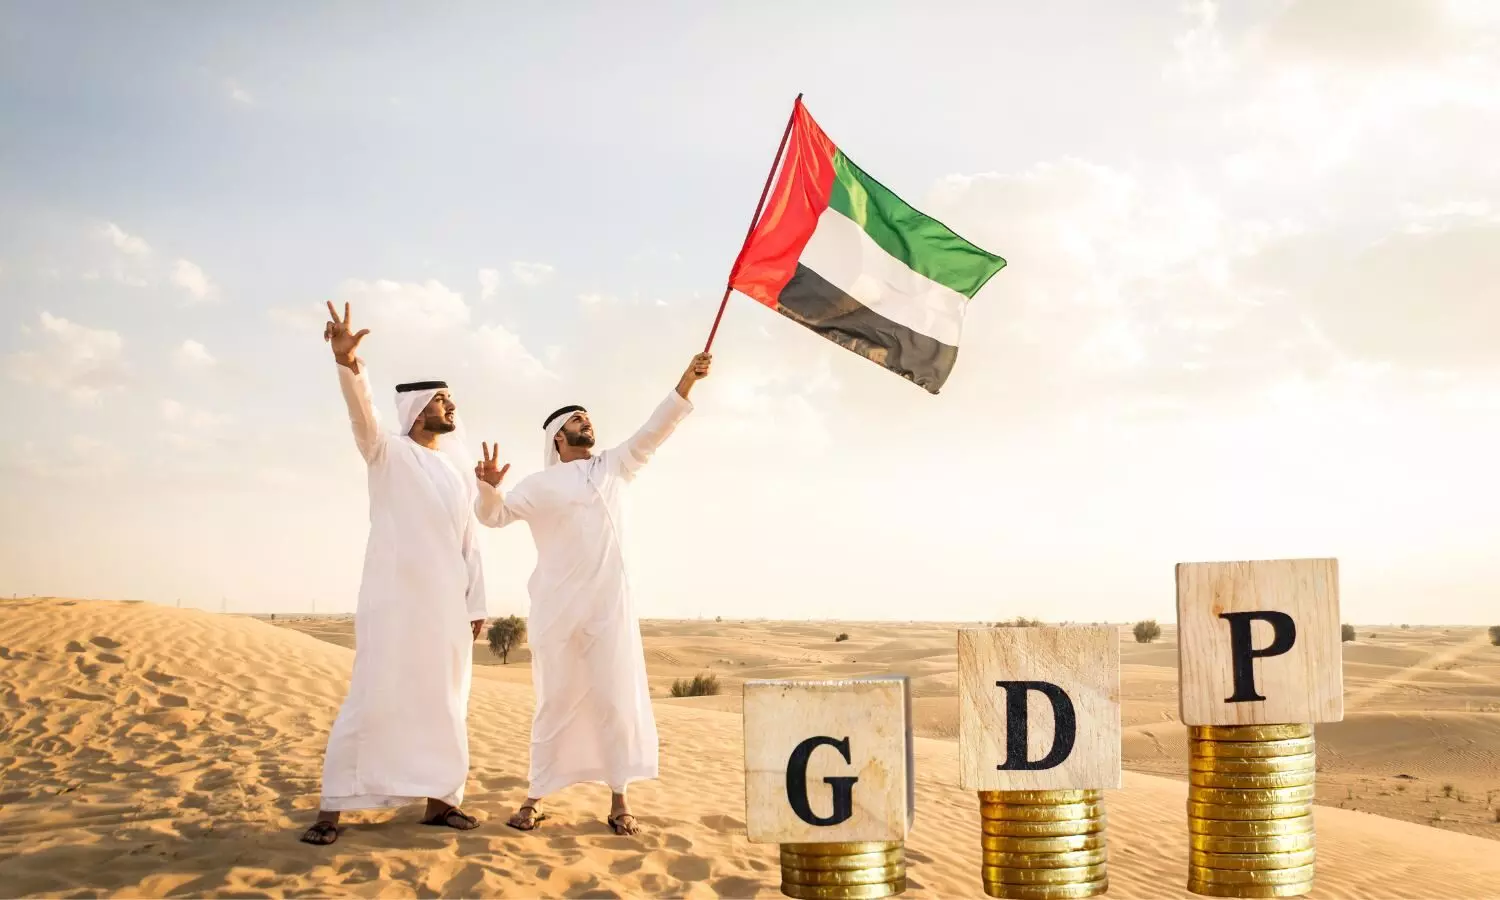 Arab men with UAE flag and GDP